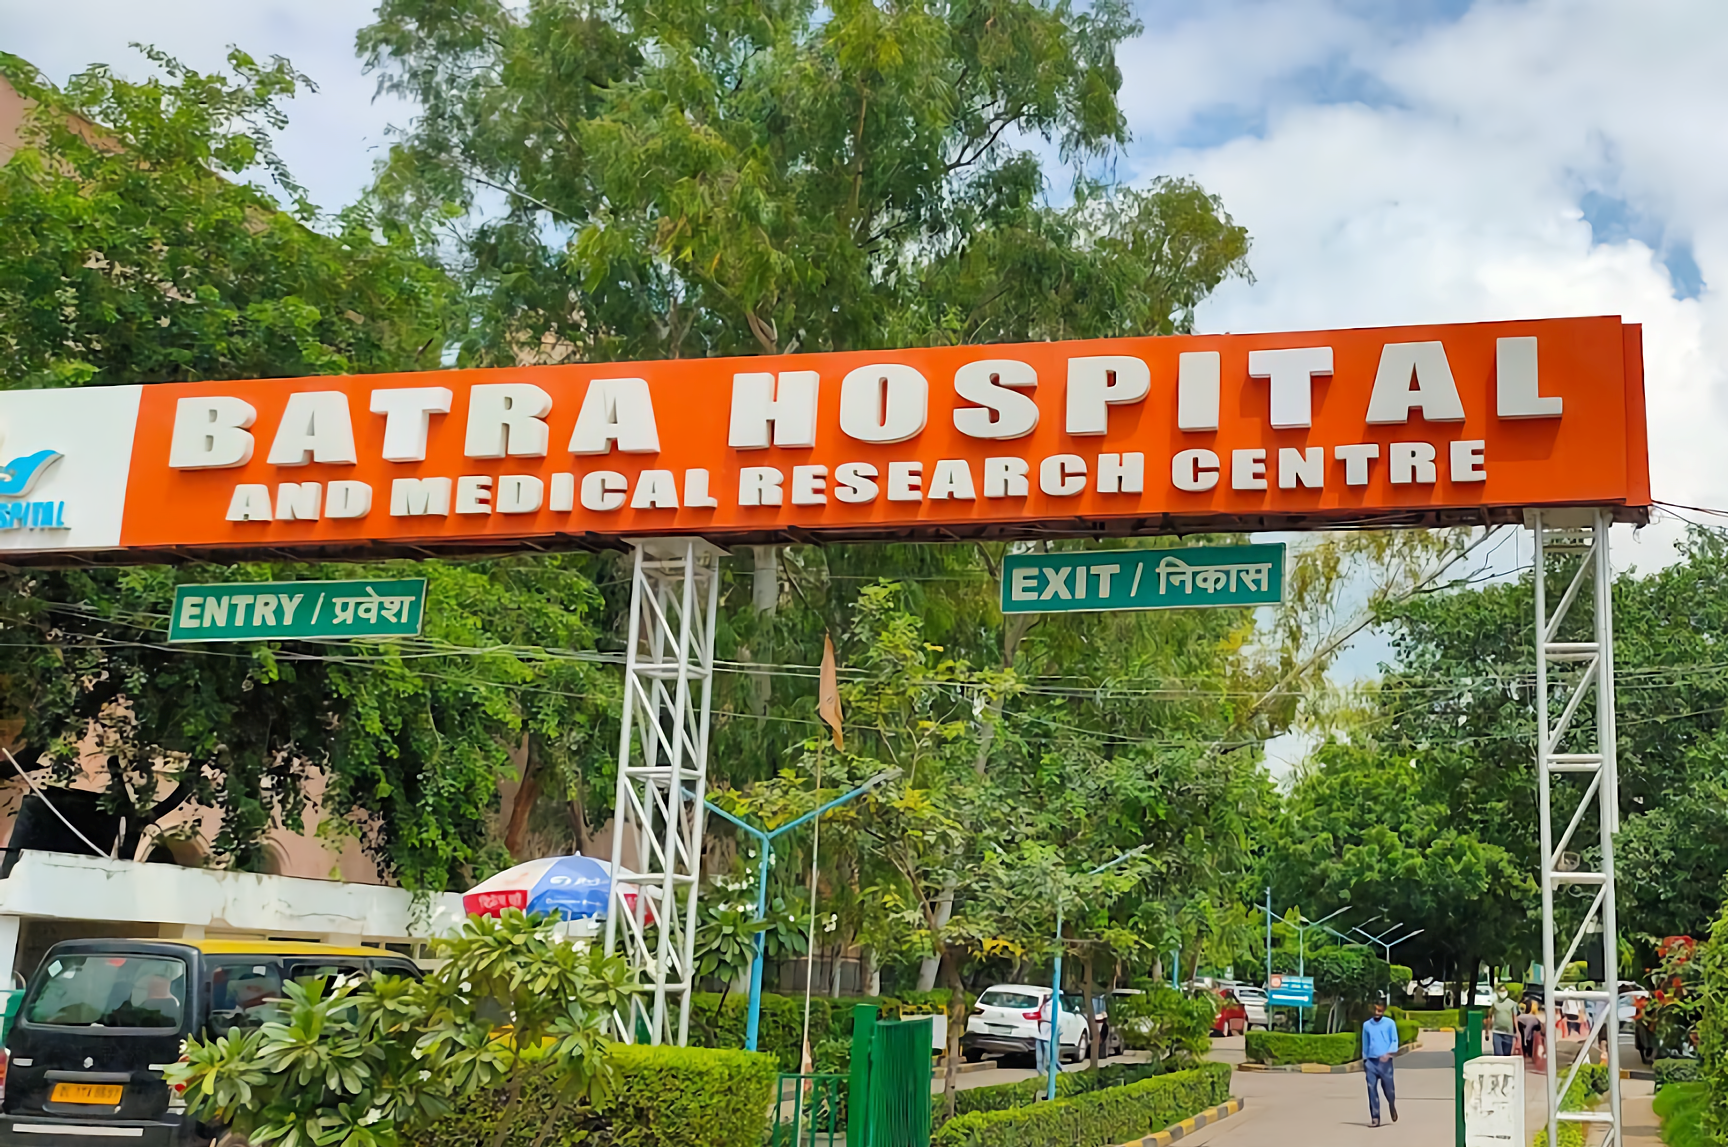 Batra Hospital And Medical Research Centre photo